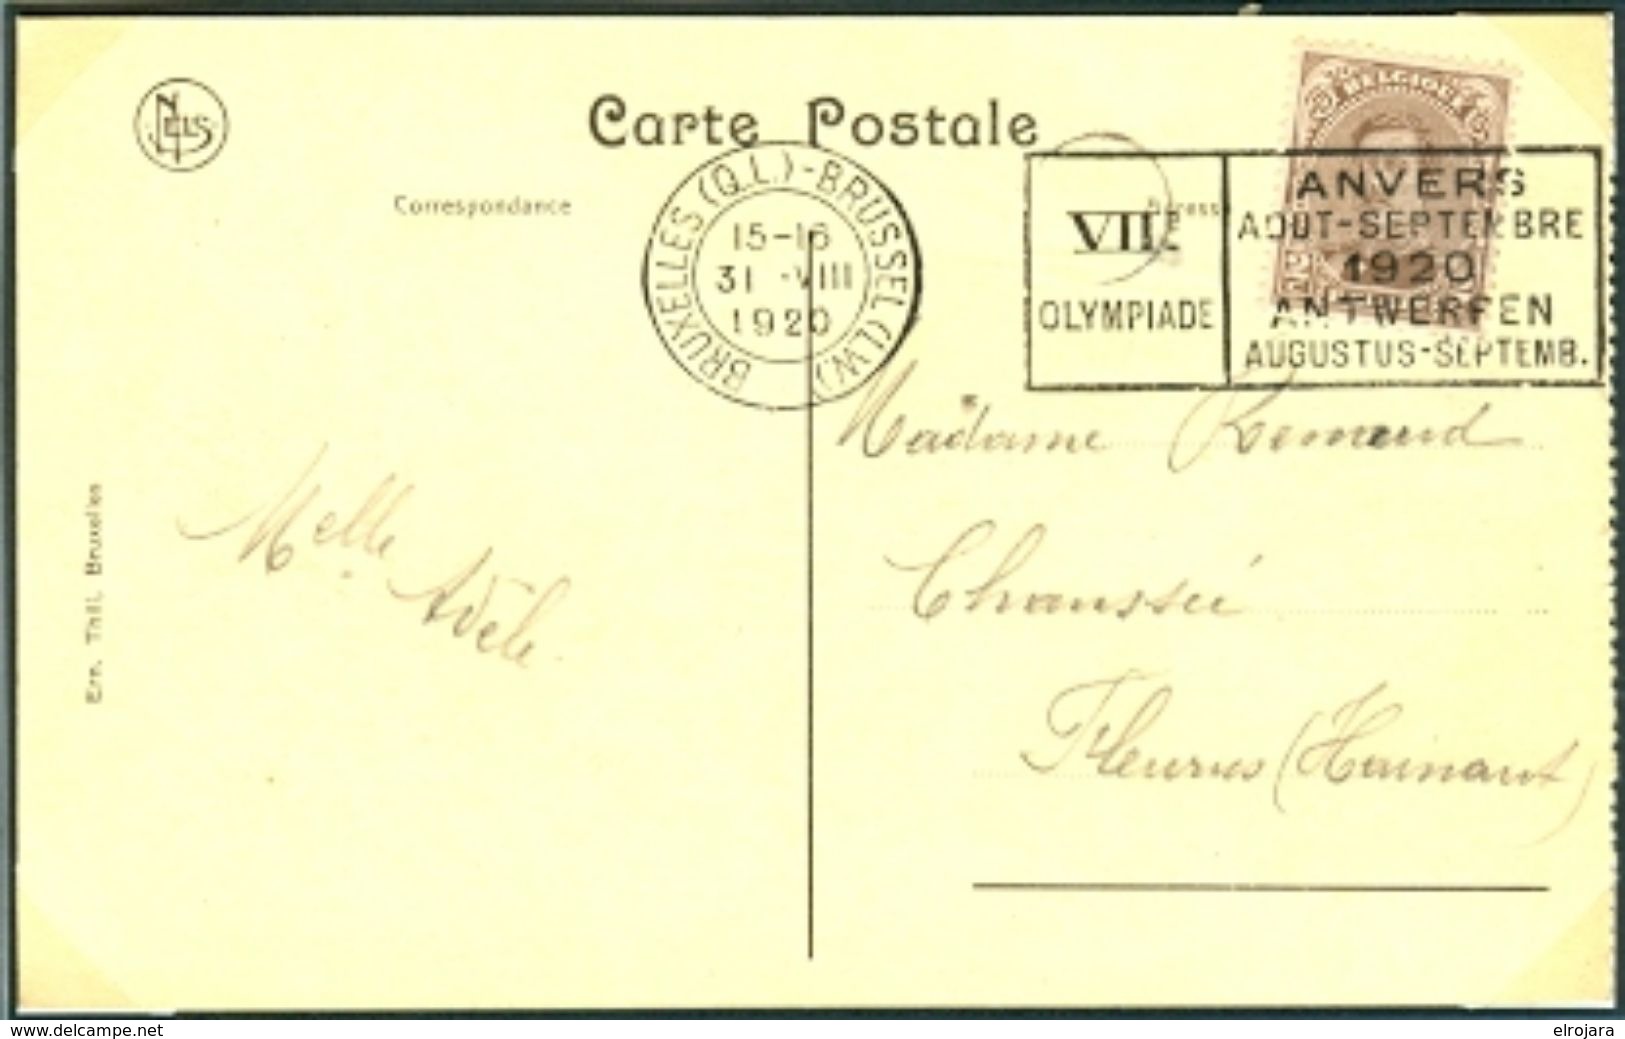 BELGIUM Postcard With Olympic Machine Cancel Bruxelles QL Brussel LW Dated 31-VIII 1920 Soccer Day - Ete 1920: Anvers